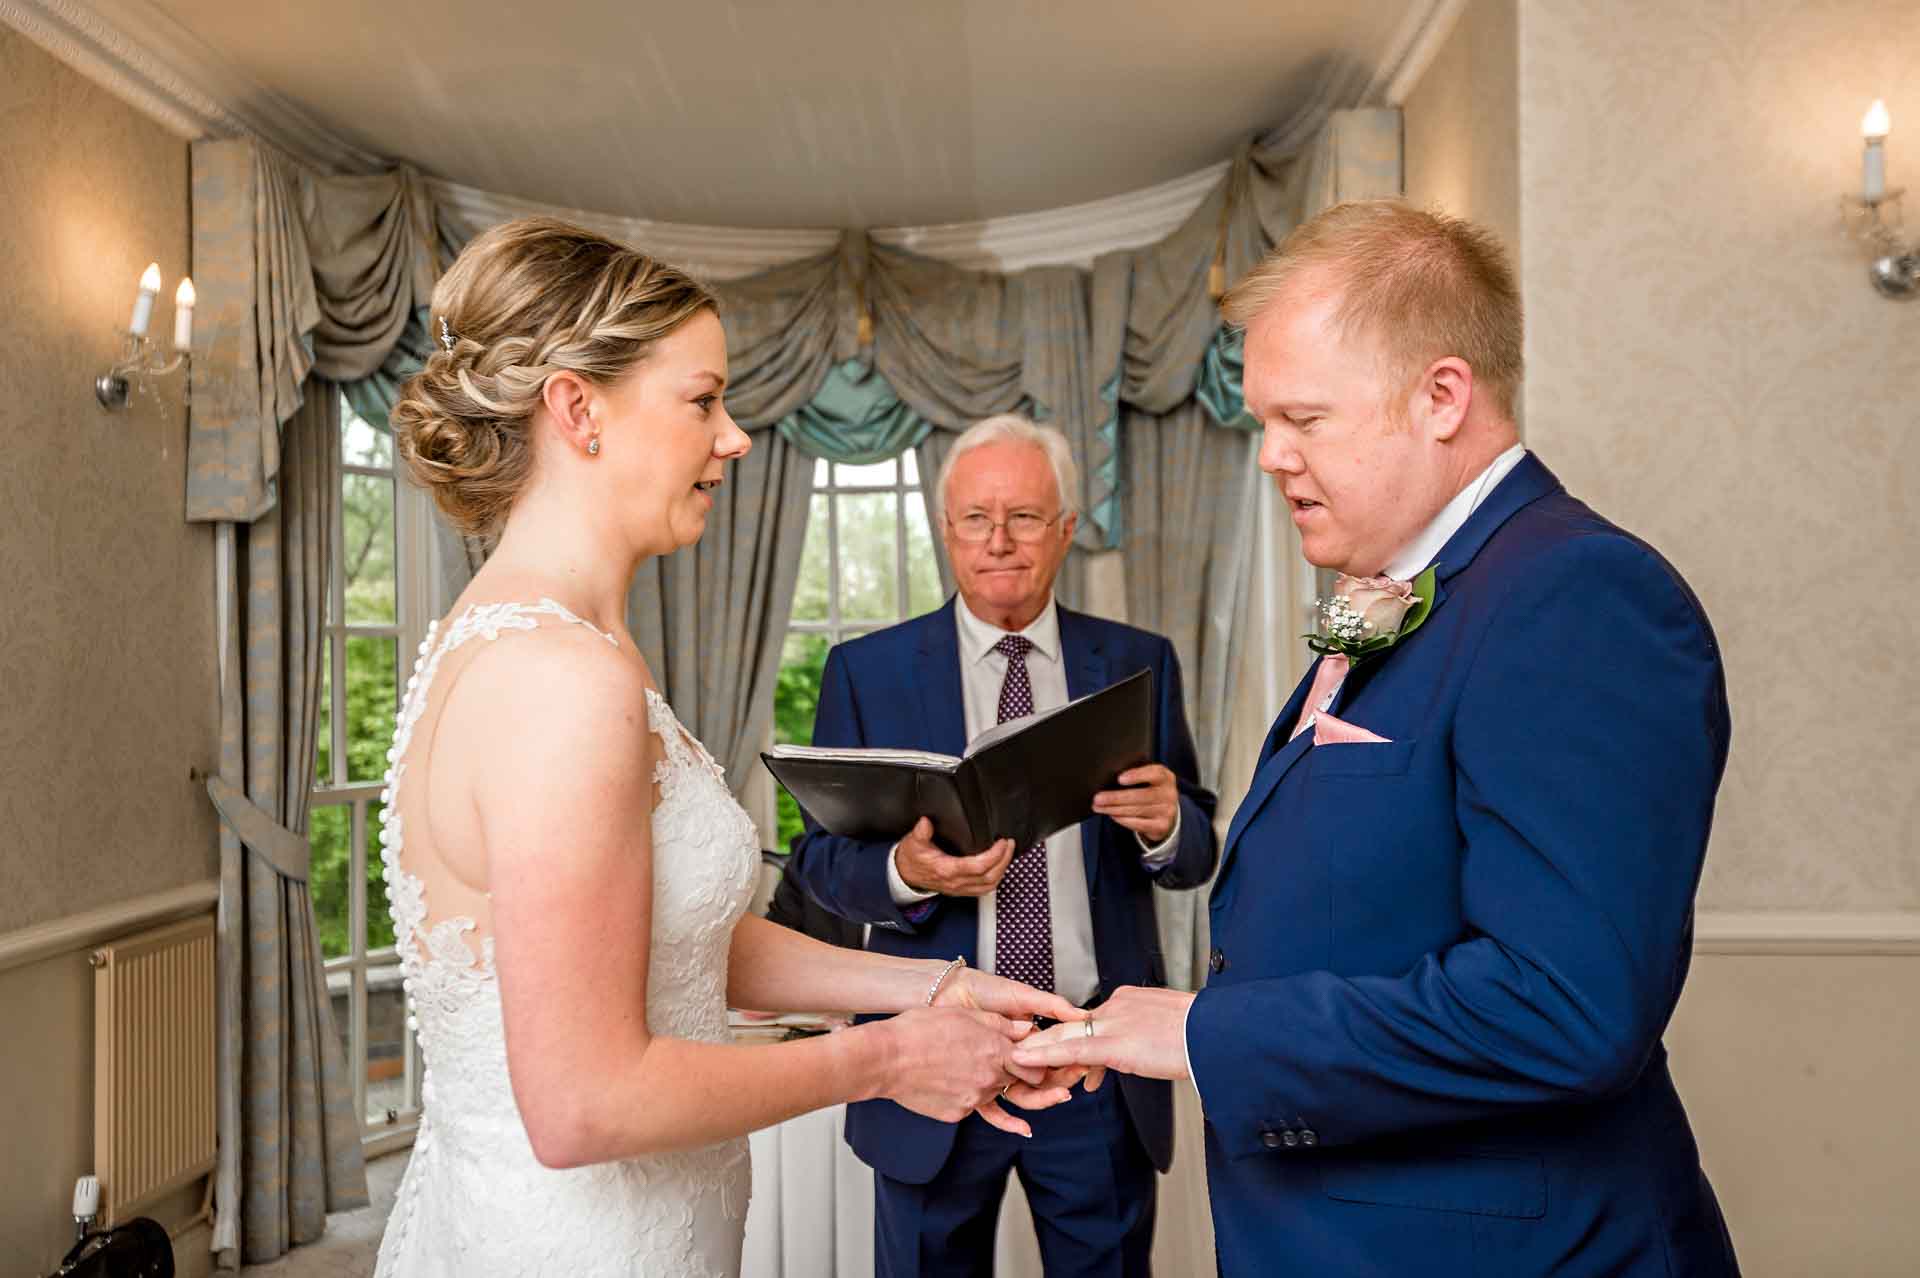 Bride places ring on groom's finger at DeCourceys Manor